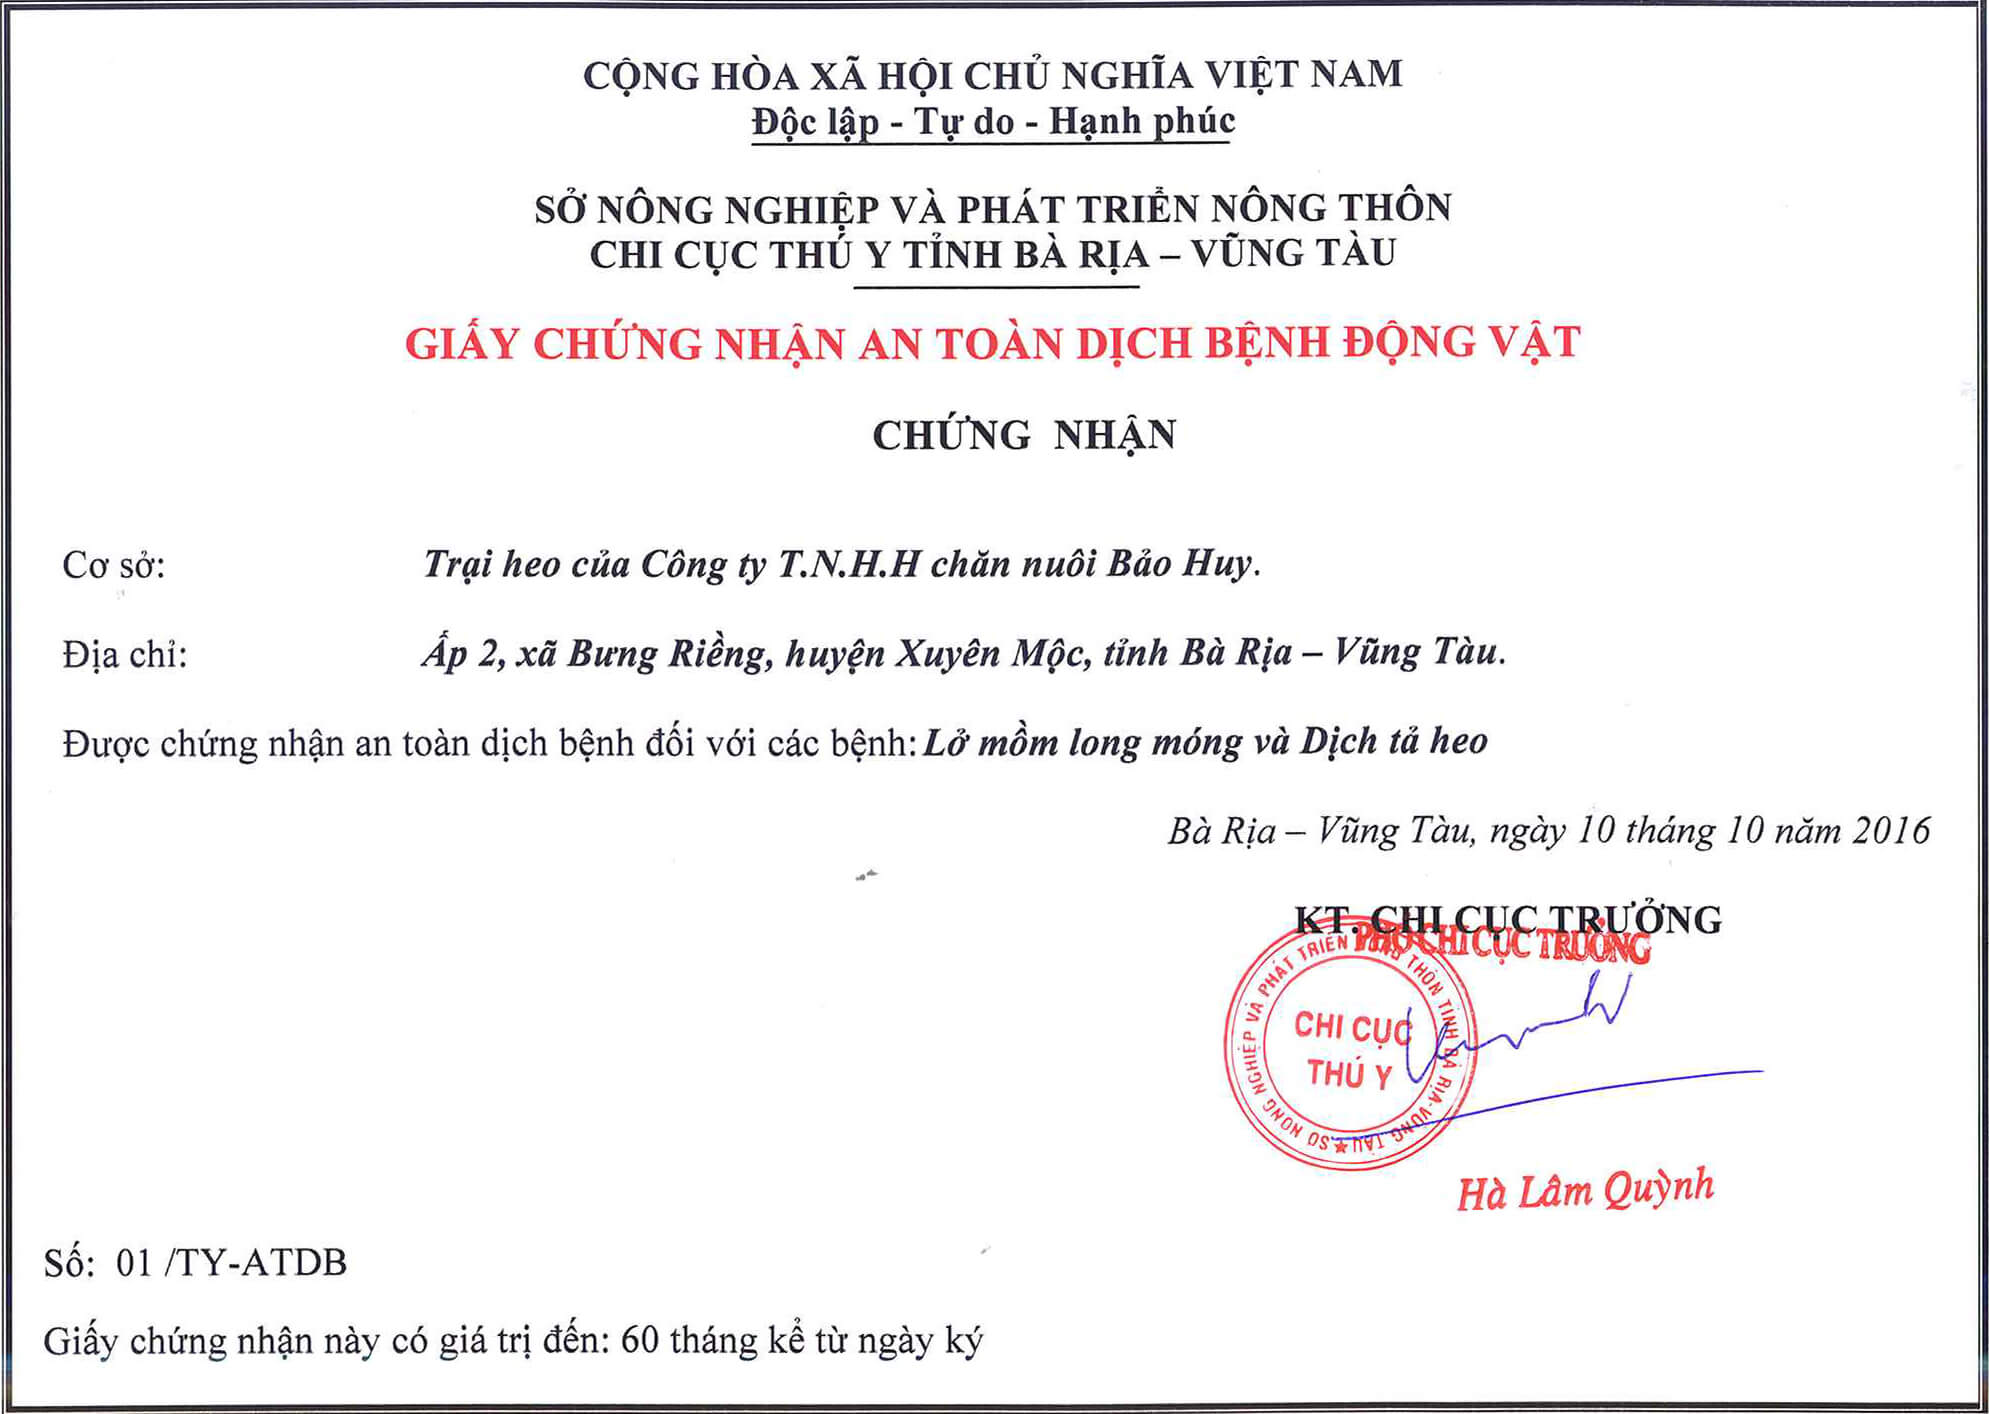 Certificate of animal disease safety - Bao Huy facility